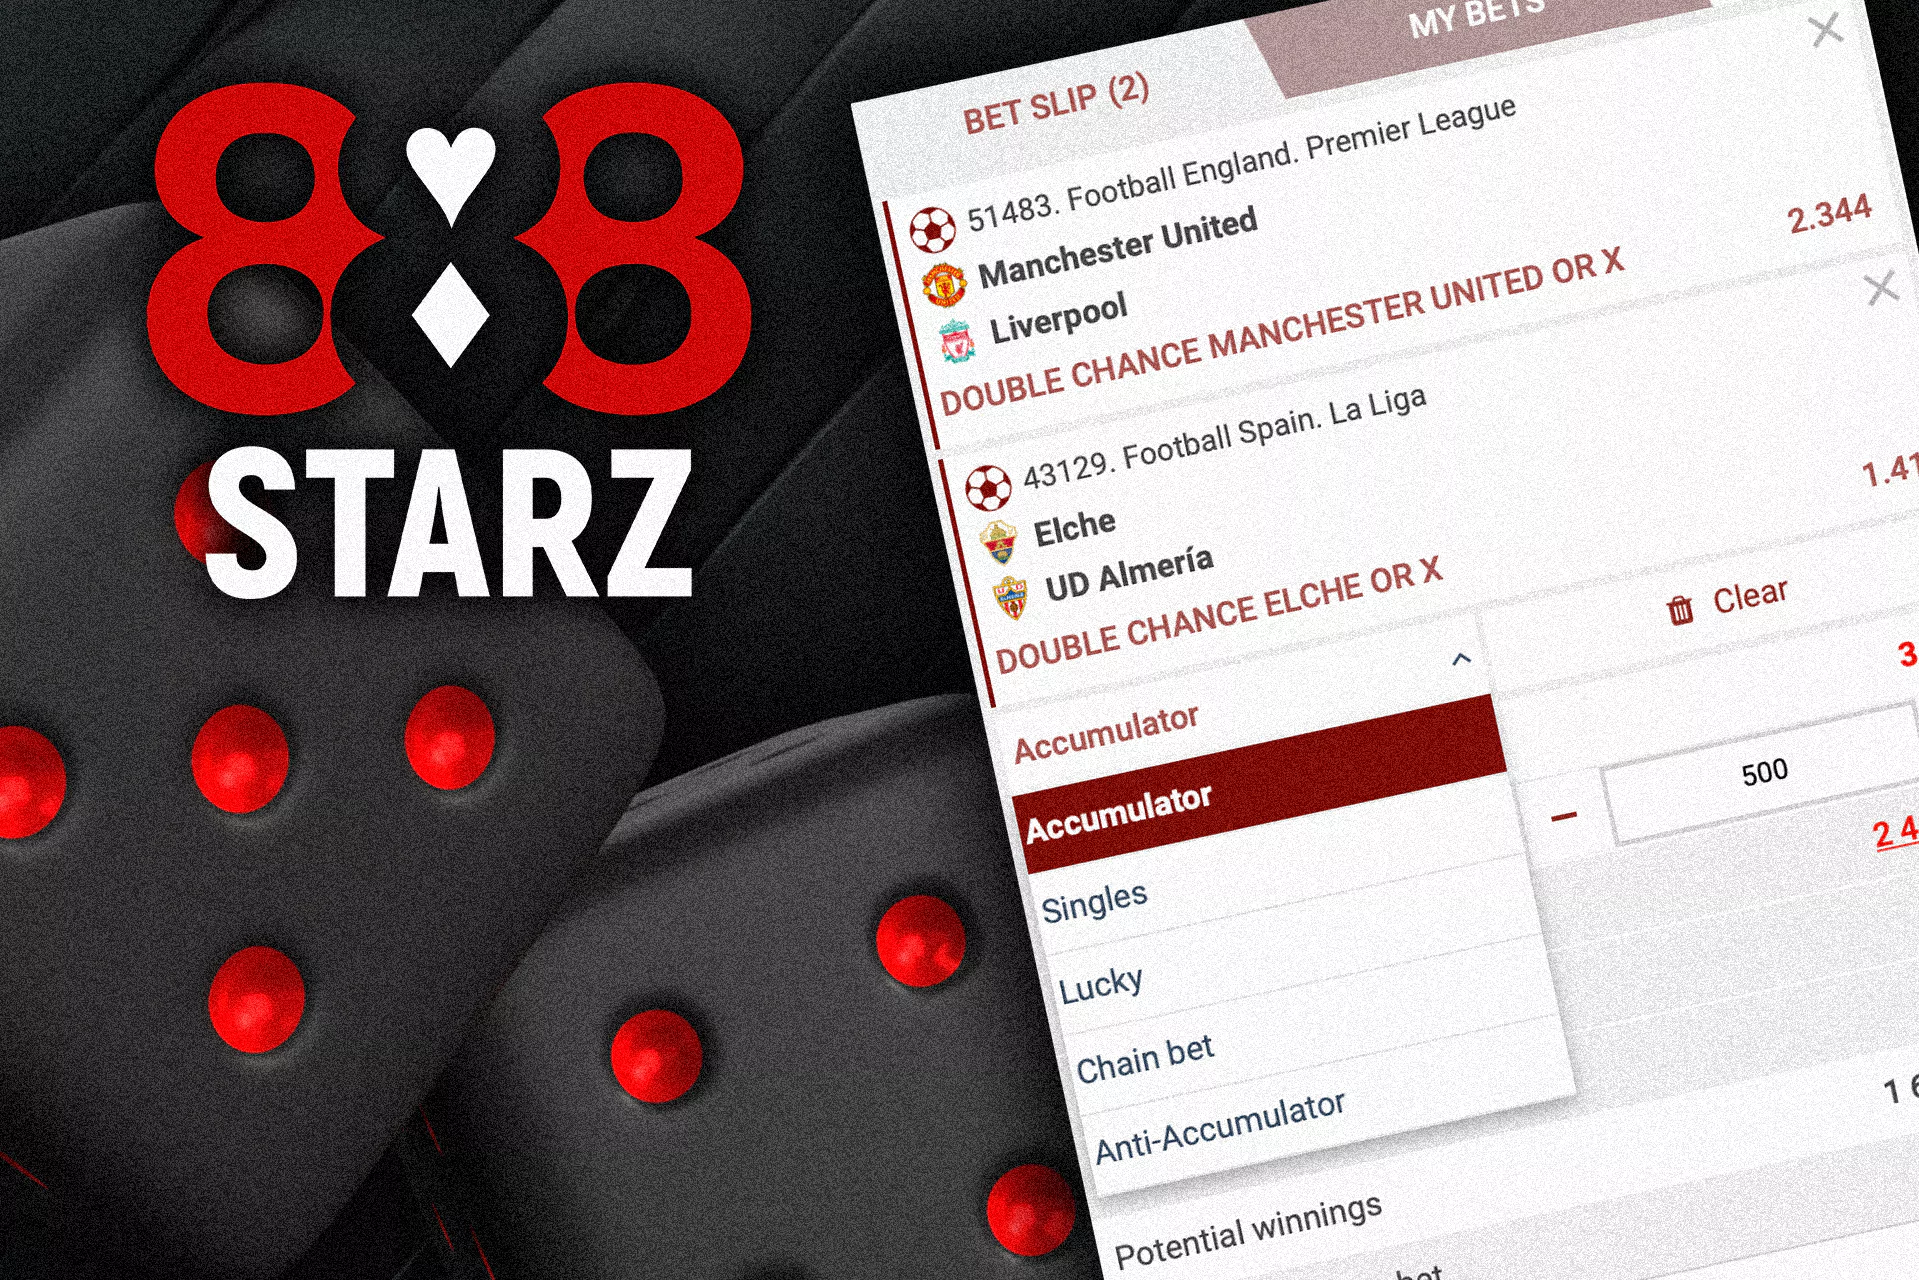 Click on any match at 888starz and choose the type of bet you want to place.